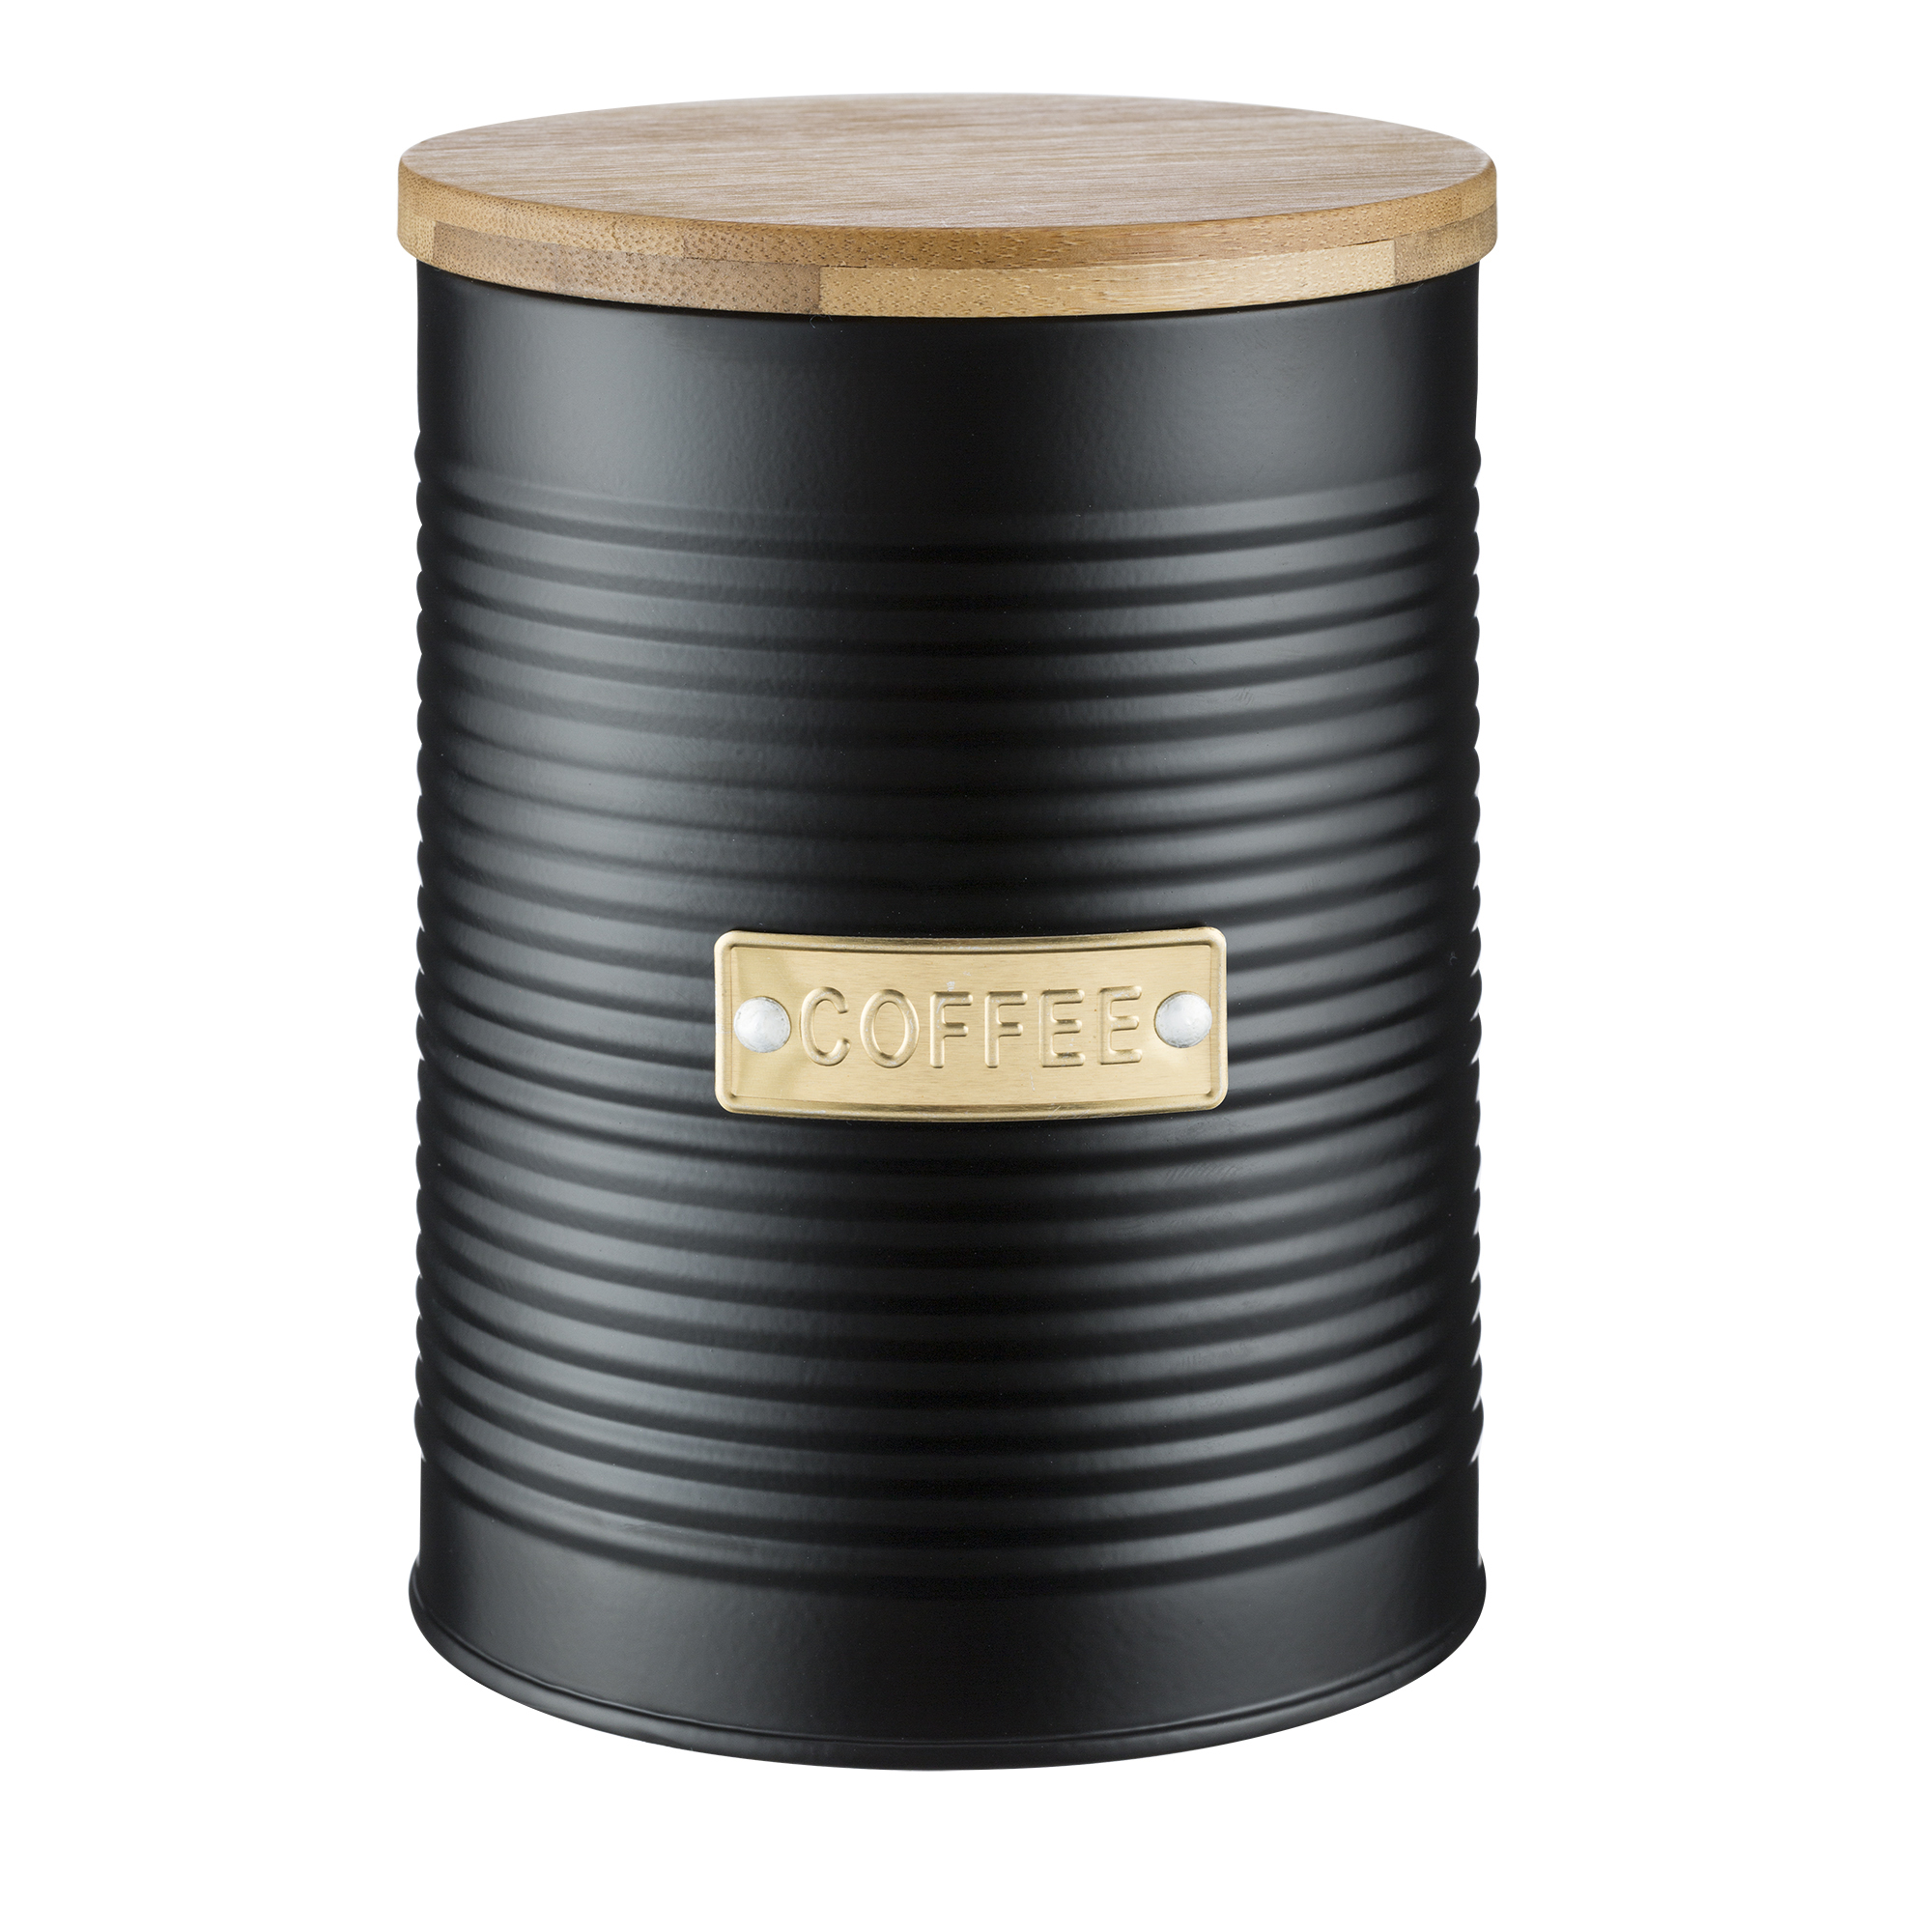 Typhoon Otto Black Coffee Canister